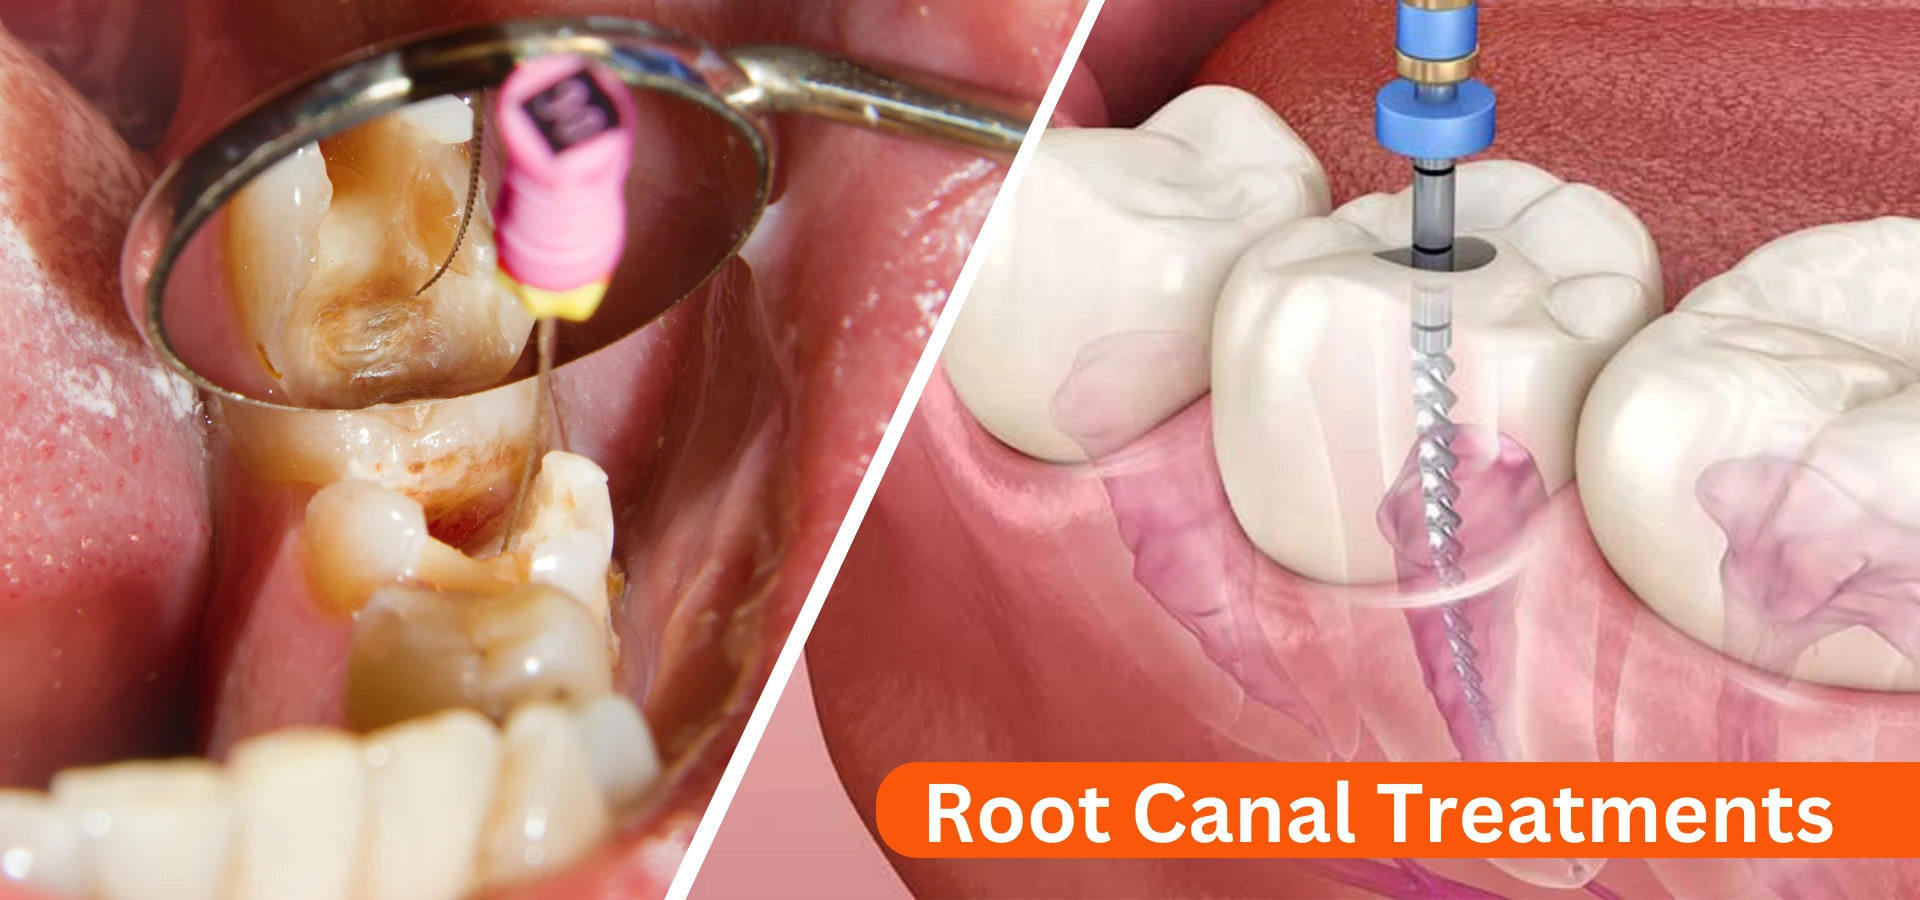 root canal treatment price in mumbai